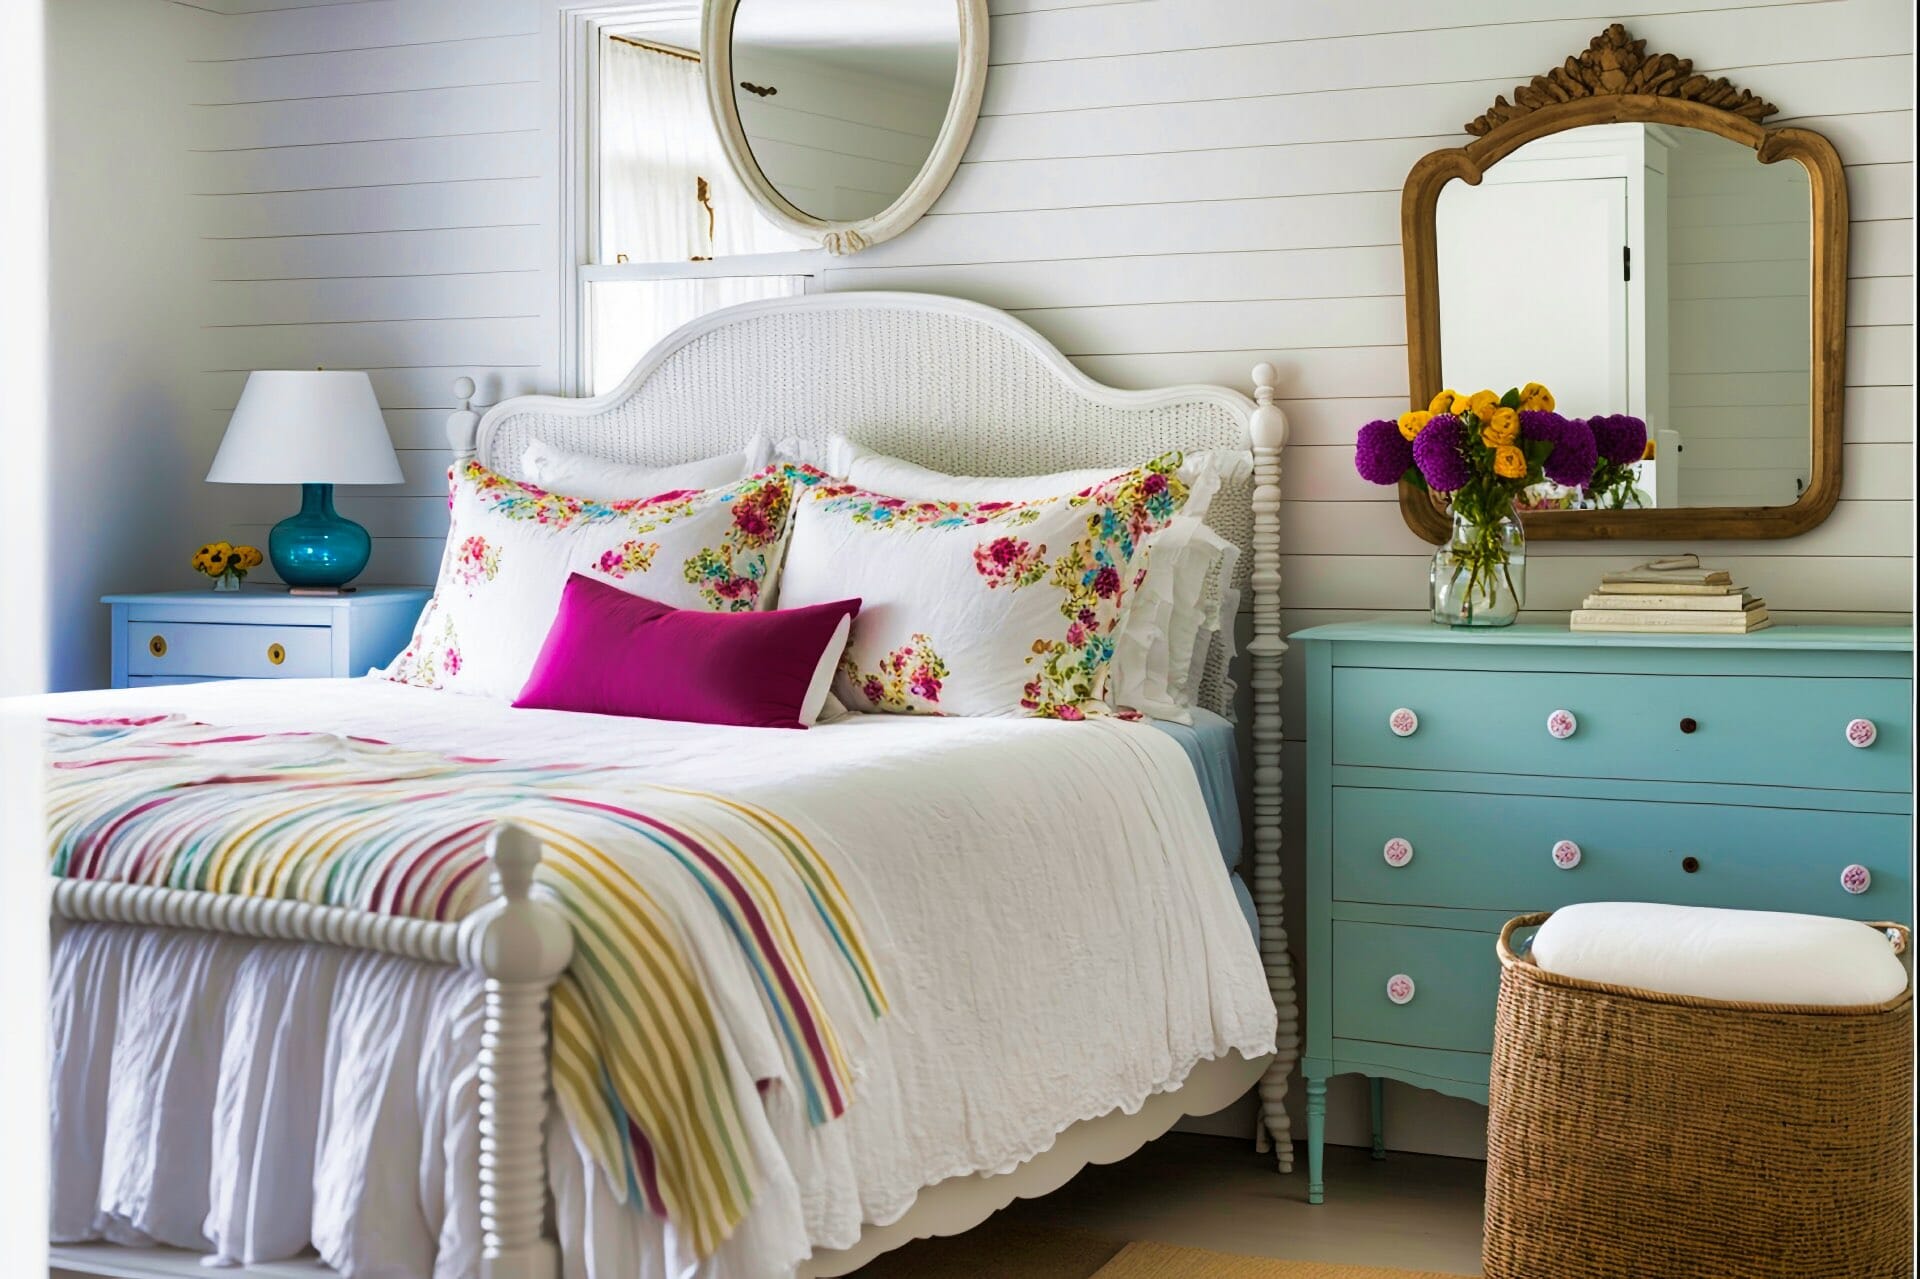 Cottage Style Bedroom With A Light And Airy Feel, Thanks To The White Washed Wood Paneled Walls And Bright White Trim. A Queen Size Bed With A Simple White Headboard Is Dressed In Crisp White Linens, And A Collection Of Colorful Throw Pillows Add A Playful Touch. A Matching White Dresser With A Decorative Mirror Above It Sits Against One Wall, And A White Wicker Chair With A Fluffy Cushion Provides A Cozy Seating Option. A Braided Rug In Shades Of Blue And White Anchors The Space, And A Collection Of Potted Plants Adds A Touch Of Greenery.